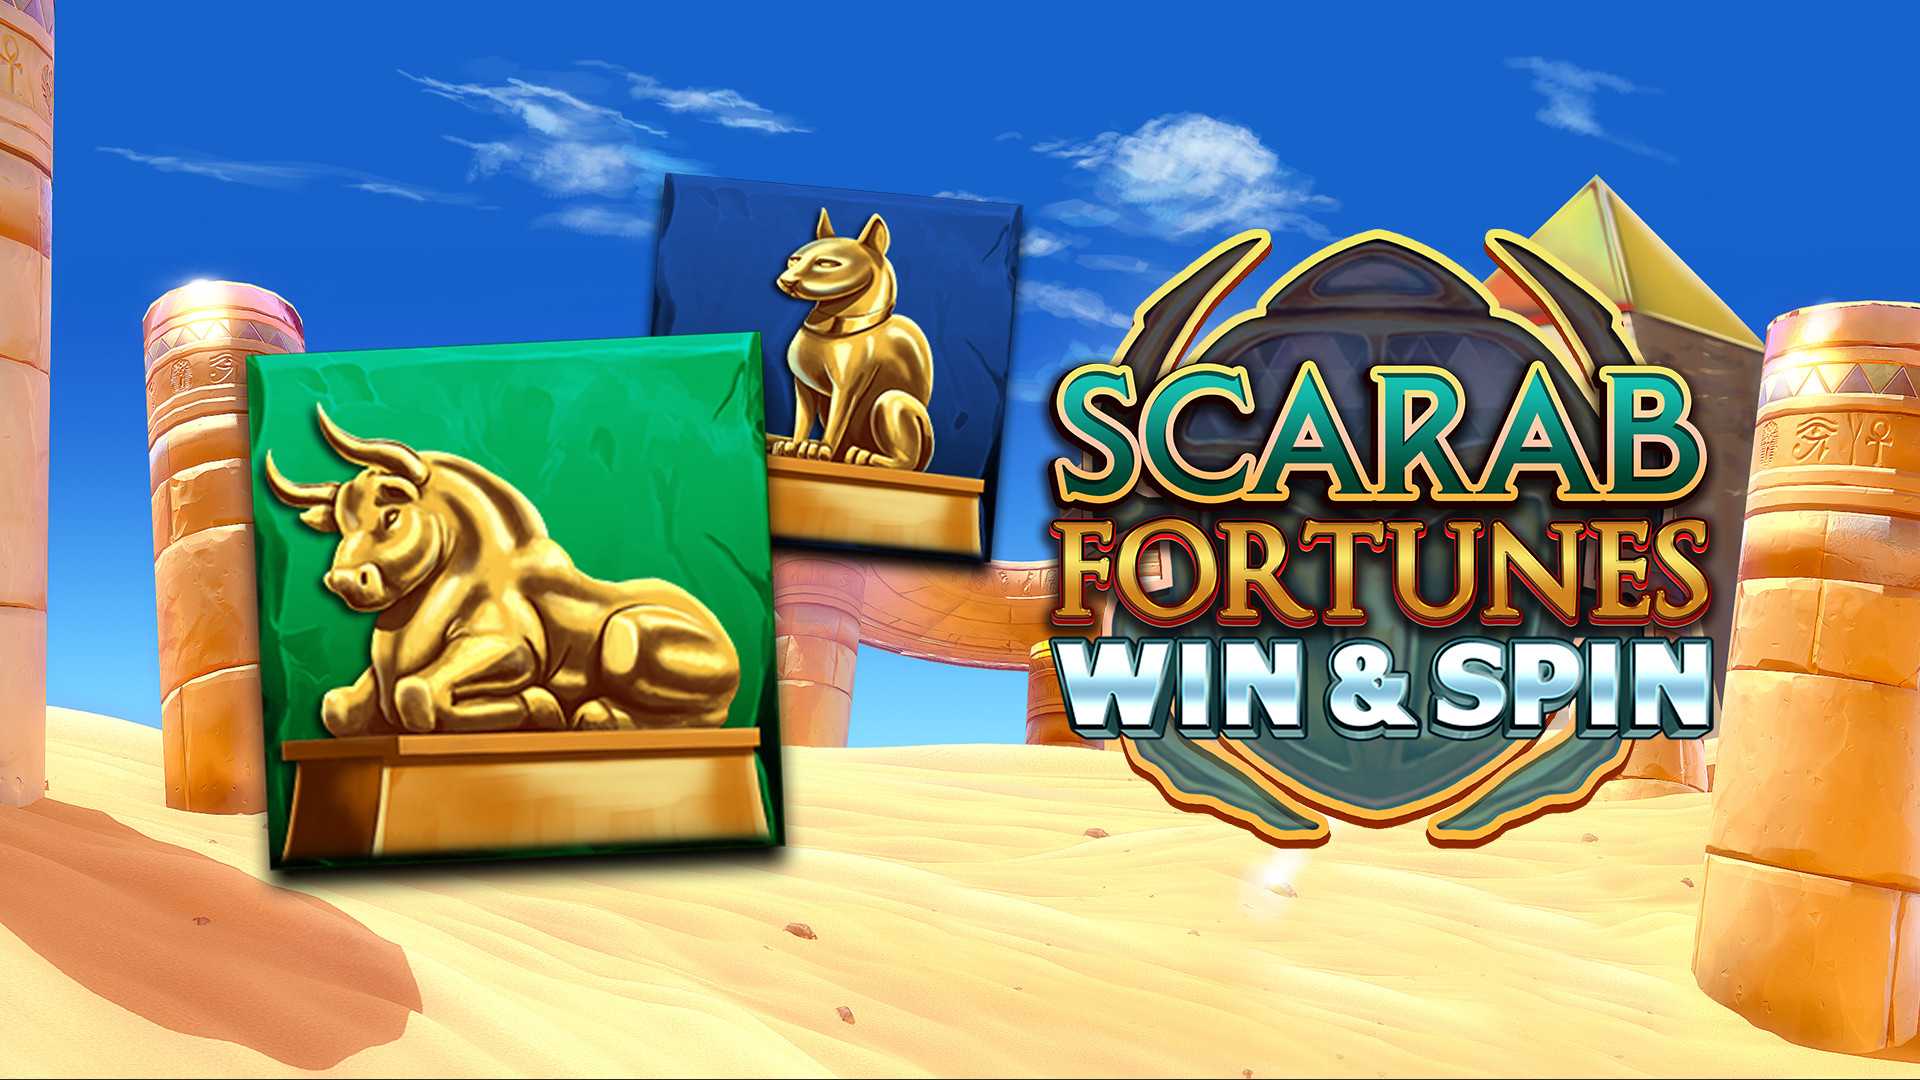 Scarab Fortunes Win and Spin